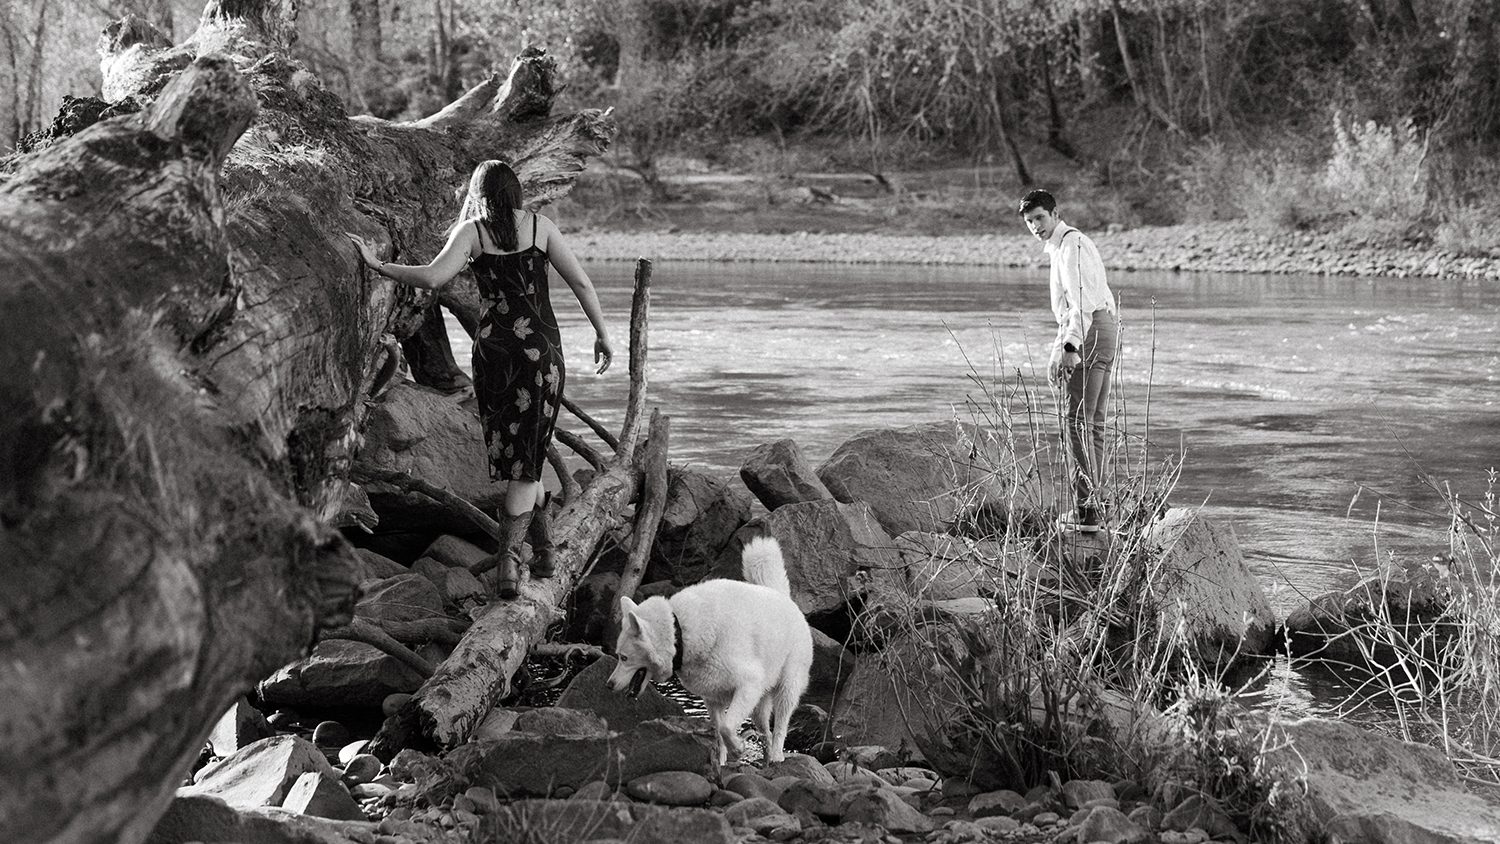 Portland family photographer captures a black and white image with a couple and their fluffy white dog exploring the banks of a river.